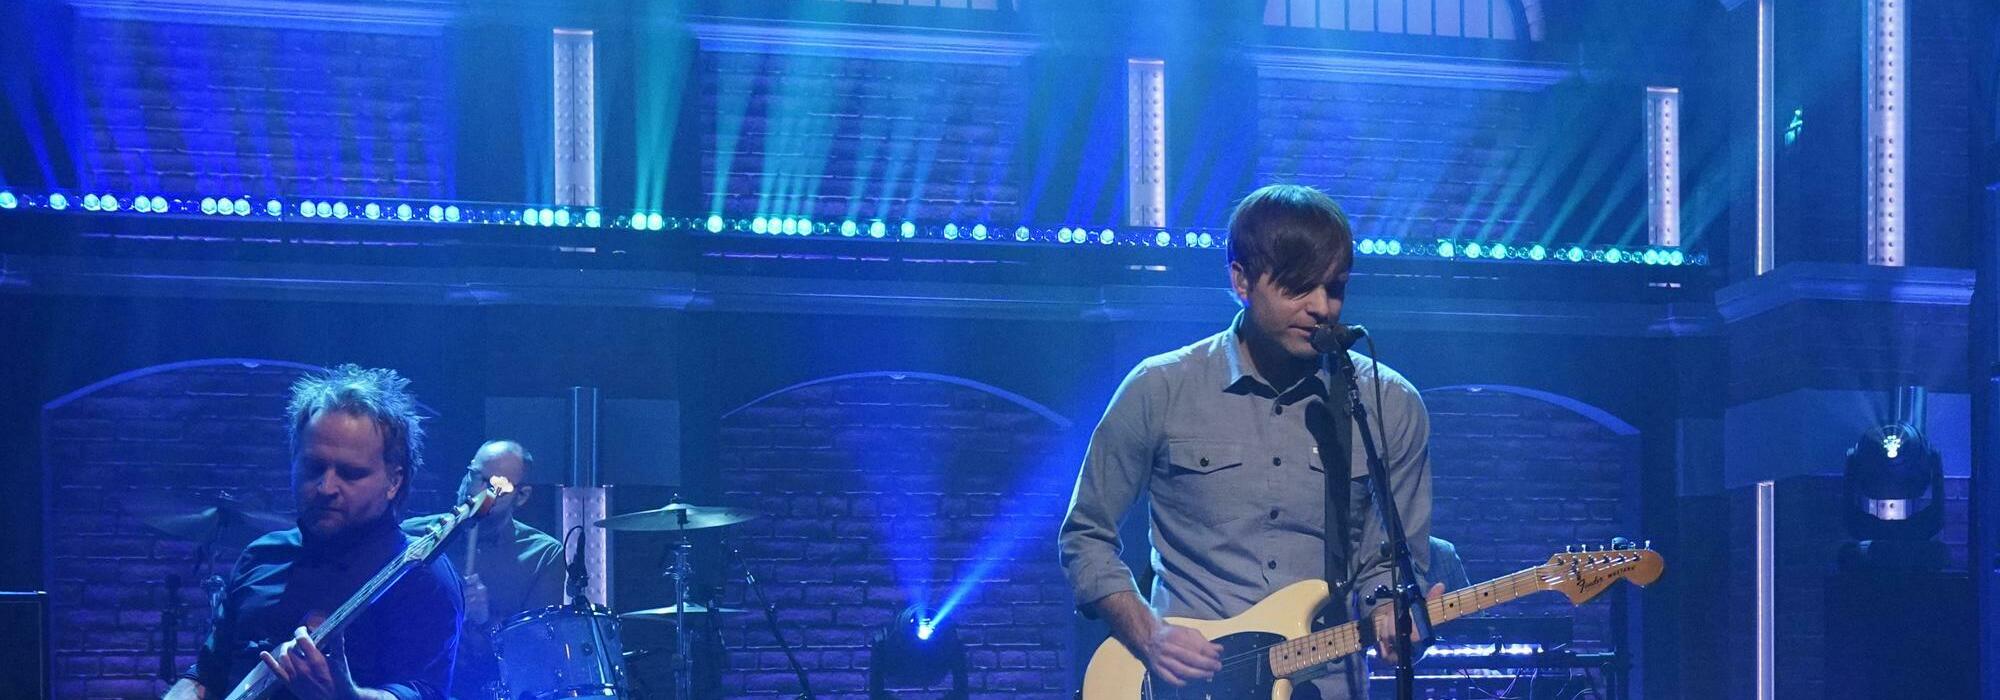 A Death Cab for Cutie live event